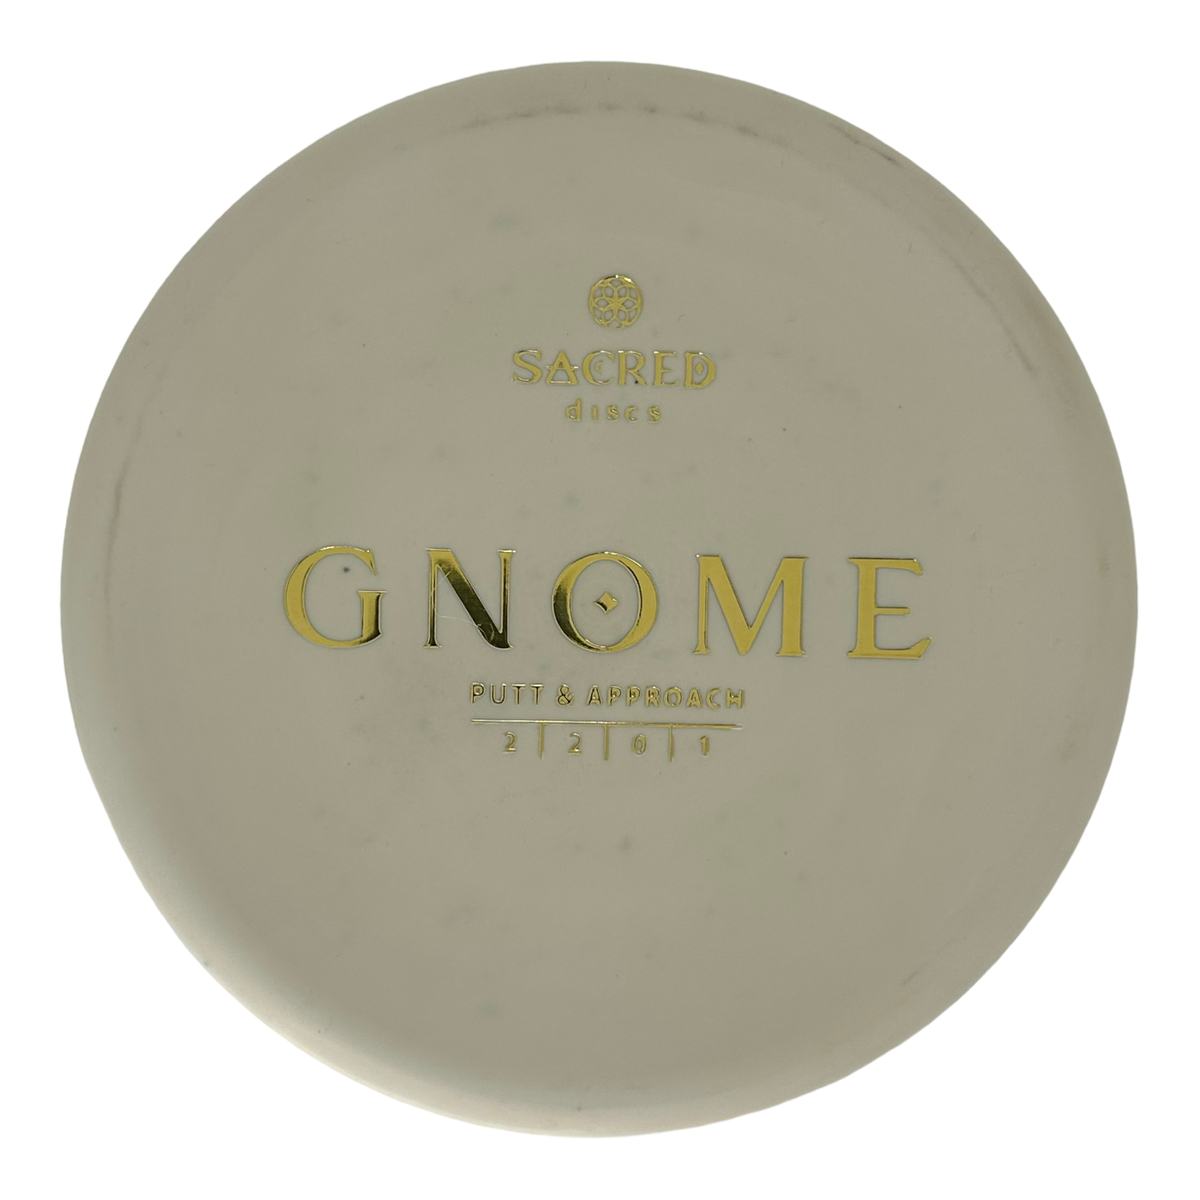 Sacred Discs Aroma Blend Gnome - First Run